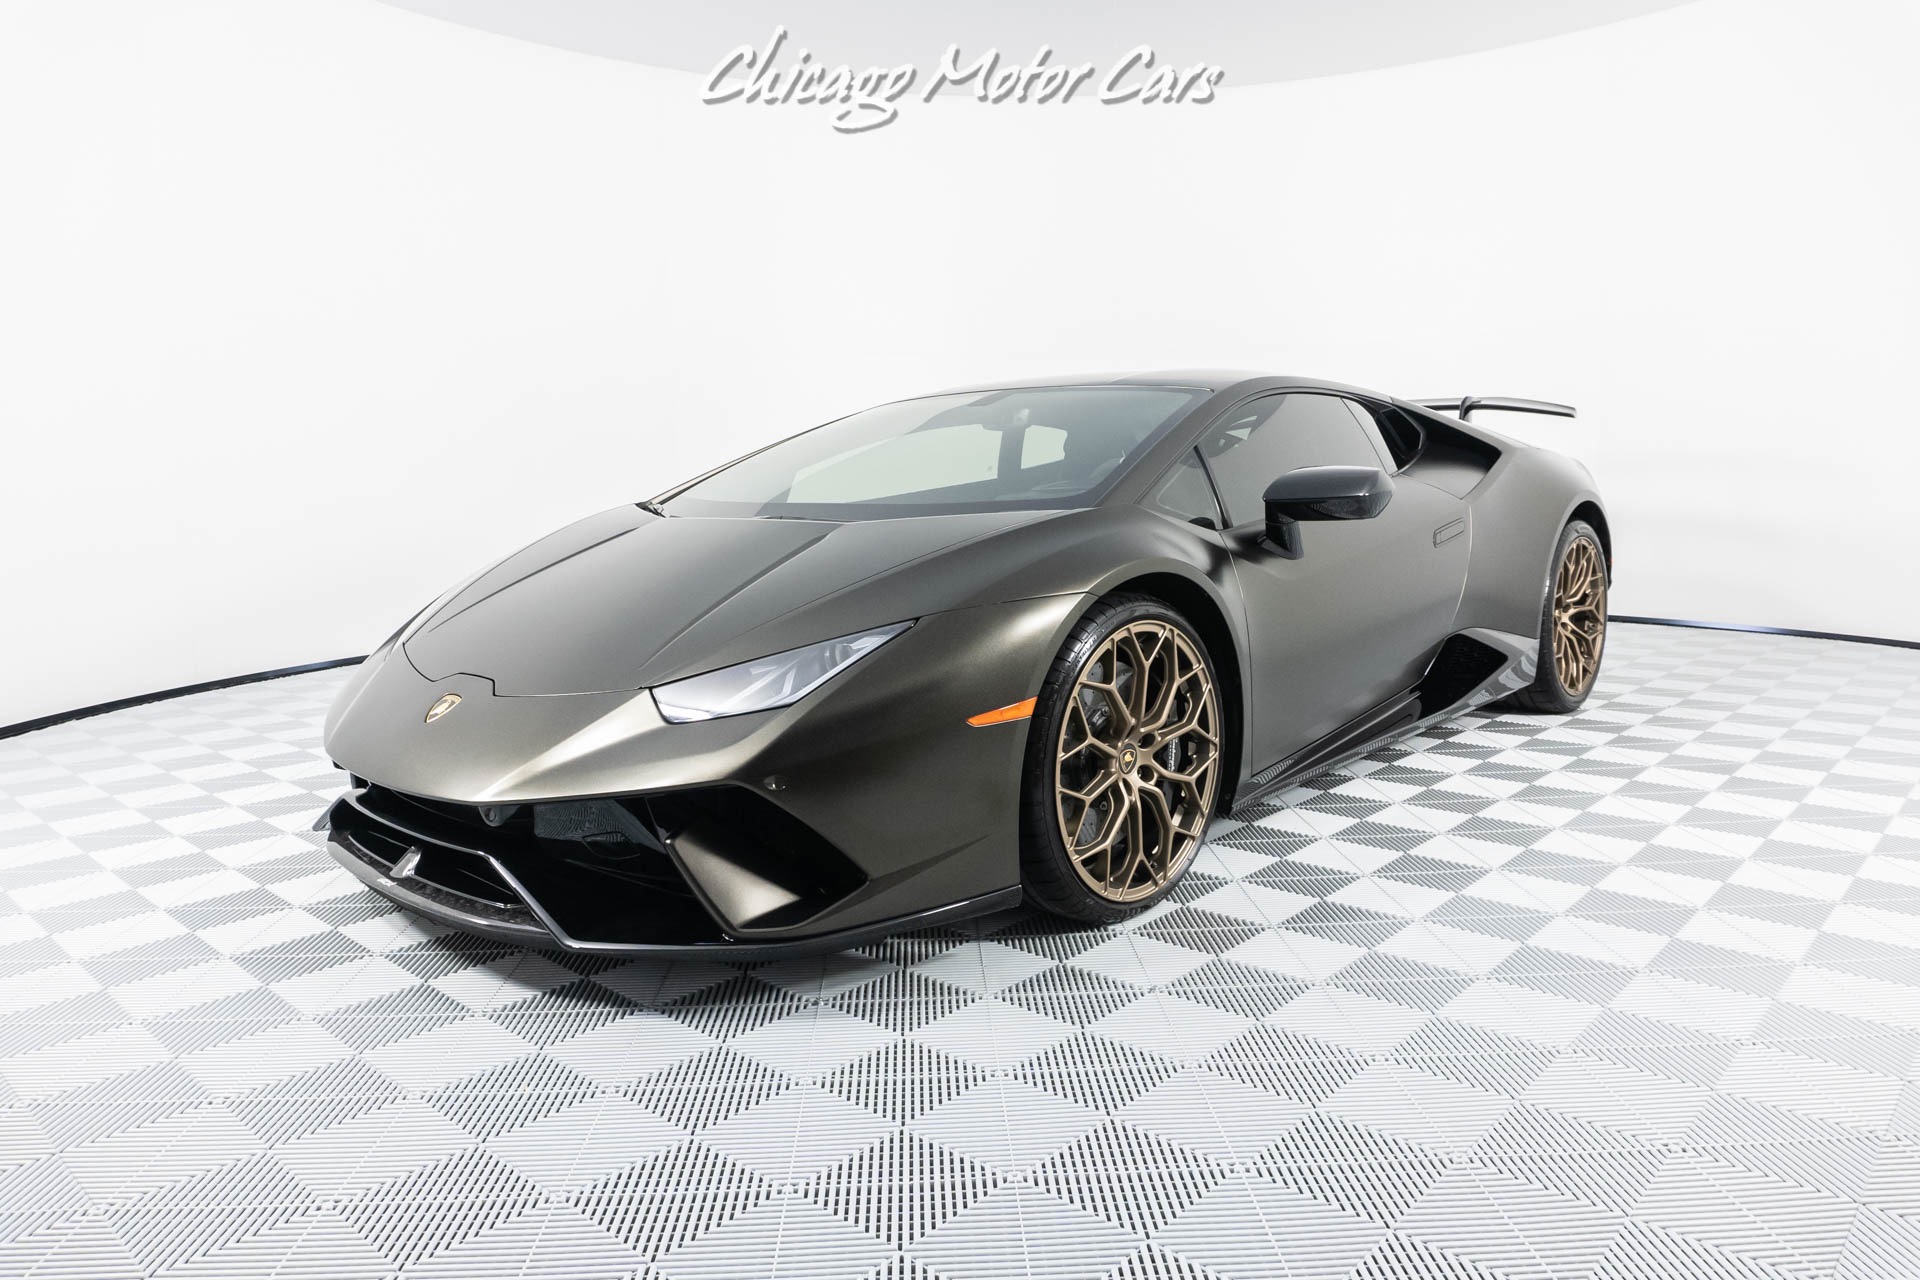 Used-2018-Lamborghini-Huracan-LP-640-4-Performante-TONS-OF-CARBON-HOT-COLOR-COMBO-ONLY-11k-MILES